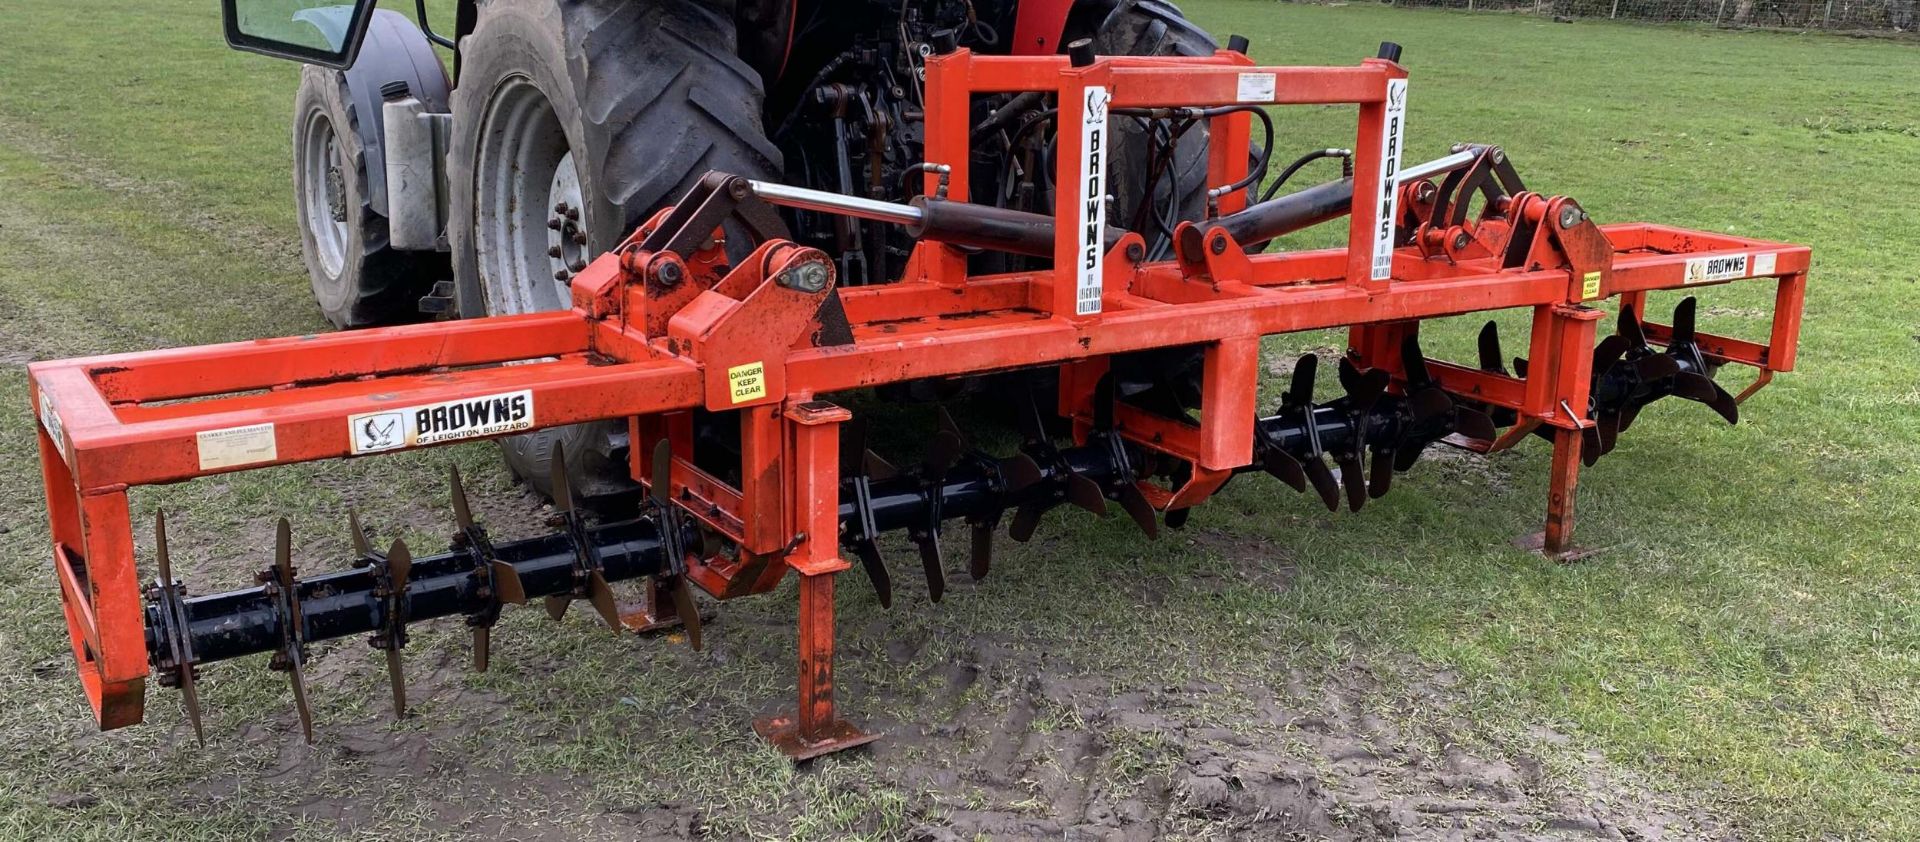 A BROWNS SLITMASTER 4 METRE HYDRAULIC FOLDING GRASS SLITTER WITH MANUAL + VAT - Image 2 of 9